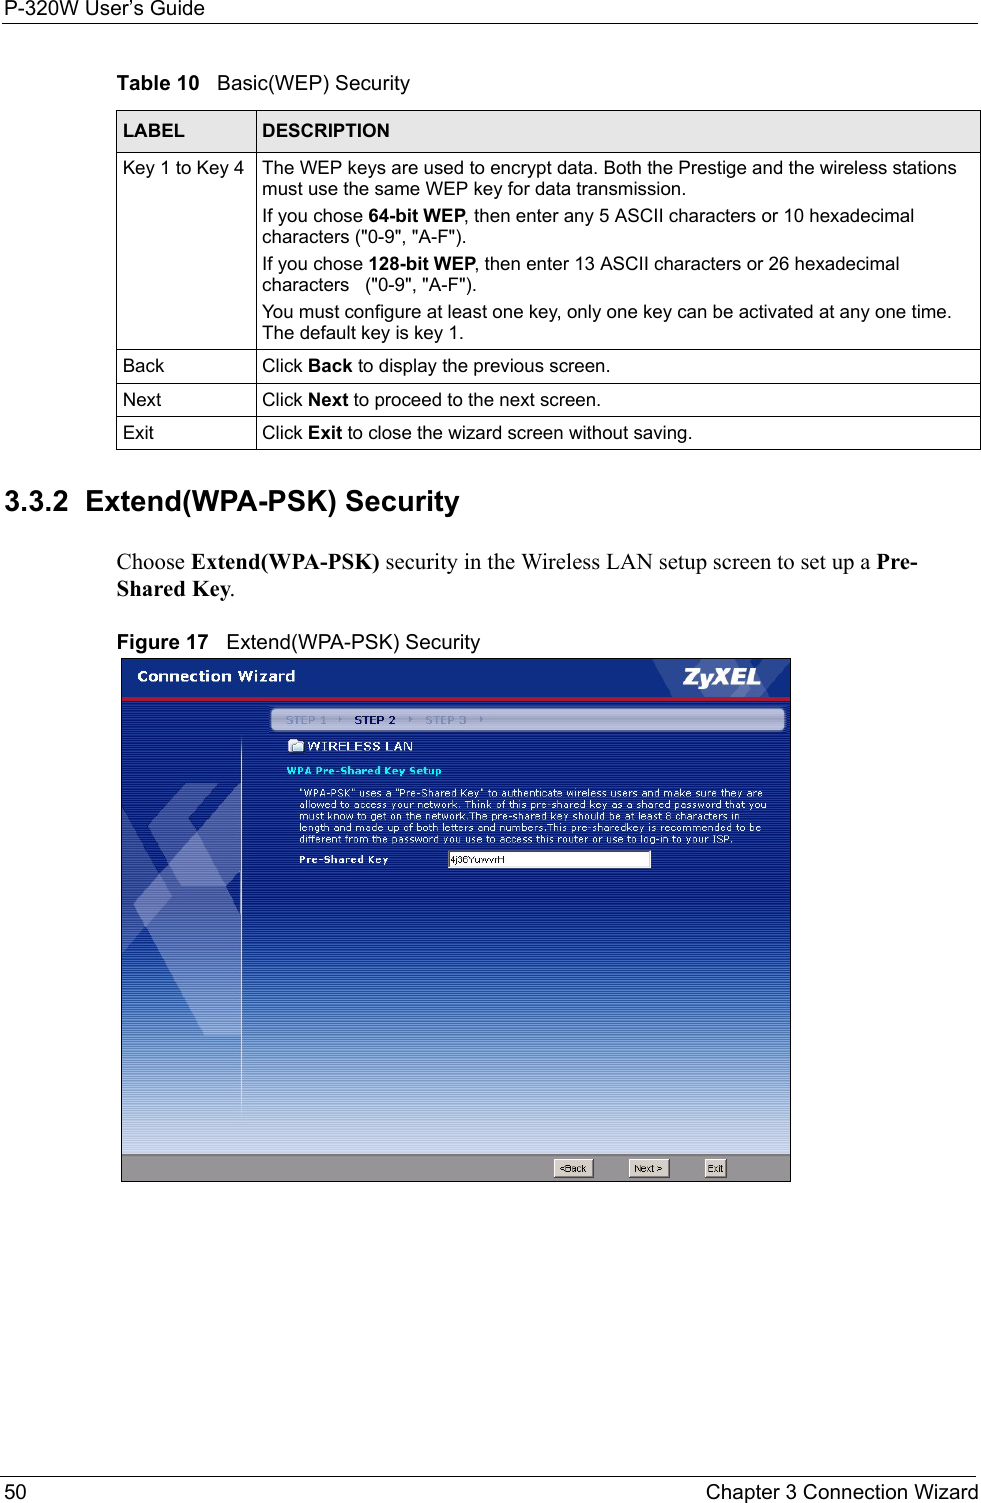 P-320W User’s Guide50  Chapter 3 Connection Wizard3.3.2  Extend(WPA-PSK) SecurityChoose Extend(WPA-PSK) security in the Wireless LAN setup screen to set up a Pre-Shared Key.Figure 17   Extend(WPA-PSK) SecurityKey 1 to Key 4  The WEP keys are used to encrypt data. Both the Prestige and the wireless stations must use the same WEP key for data transmission.If you chose 64-bit WEP, then enter any 5 ASCII characters or 10 hexadecimal characters (&quot;0-9&quot;, &quot;A-F&quot;).If you chose 128-bit WEP, then enter 13 ASCII characters or 26 hexadecimal characters   (&quot;0-9&quot;, &quot;A-F&quot;). You must configure at least one key, only one key can be activated at any one time. The default key is key 1.Back Click Back to display the previous screen.Next Click Next to proceed to the next screen. Exit Click Exit to close the wizard screen without saving.Table 10   Basic(WEP) SecurityLABEL DESCRIPTION